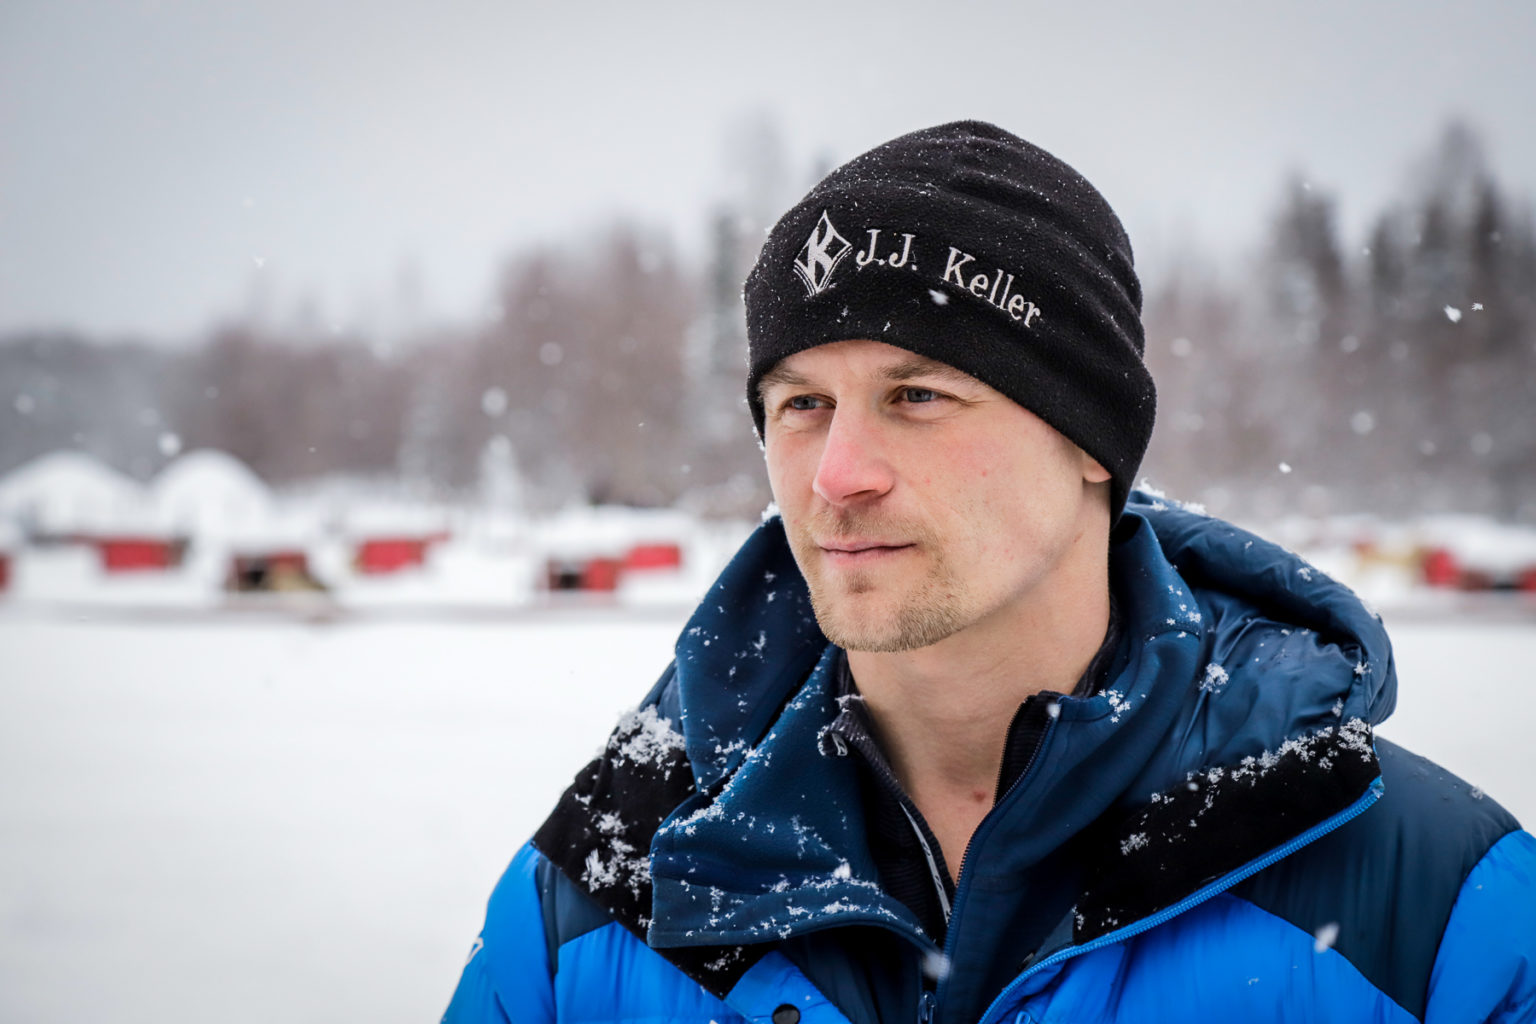 Dallas Seavey returns to Iditarod after mysterious scandal rocked his